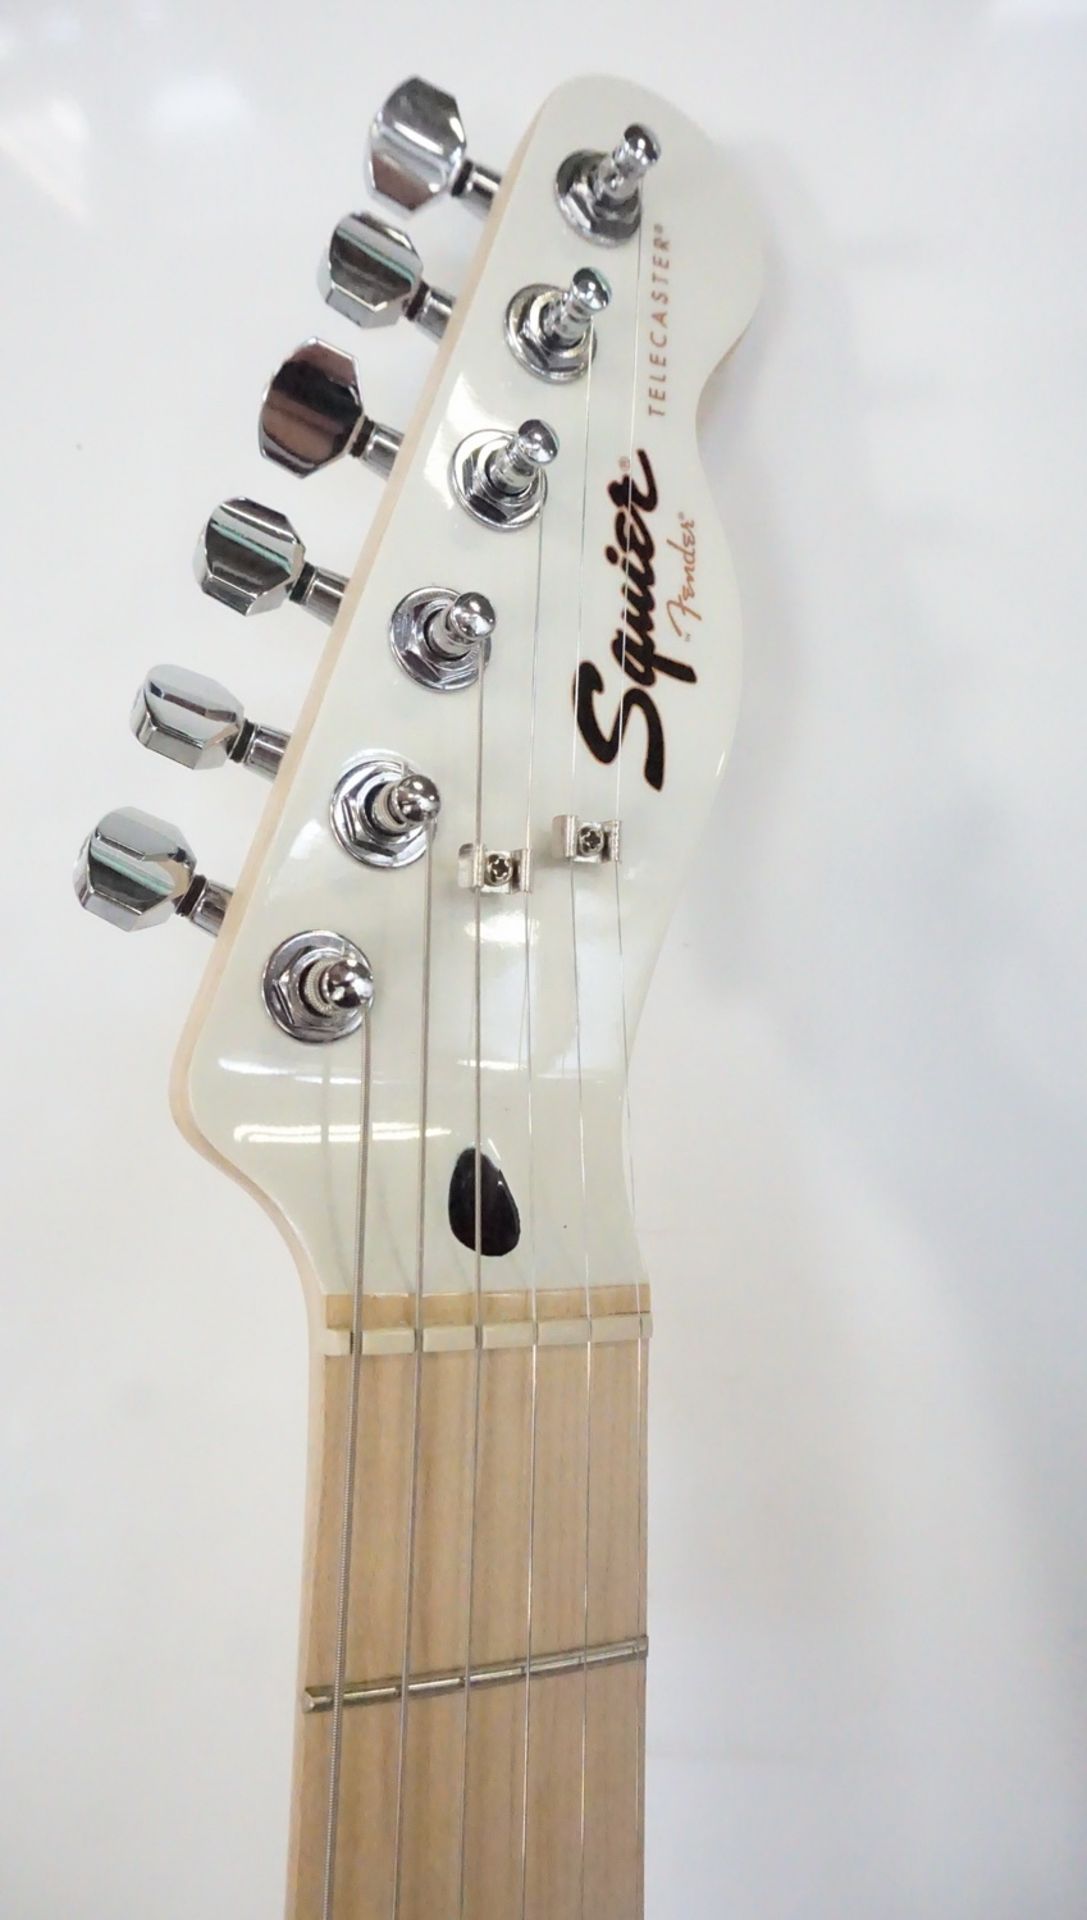 SQUIER CONTEMPORARY TELECASTER HH MN PRL WHITE ELECTRIC GUITAR (SMALL PAINT CHIP ON SIDE) - Image 3 of 6